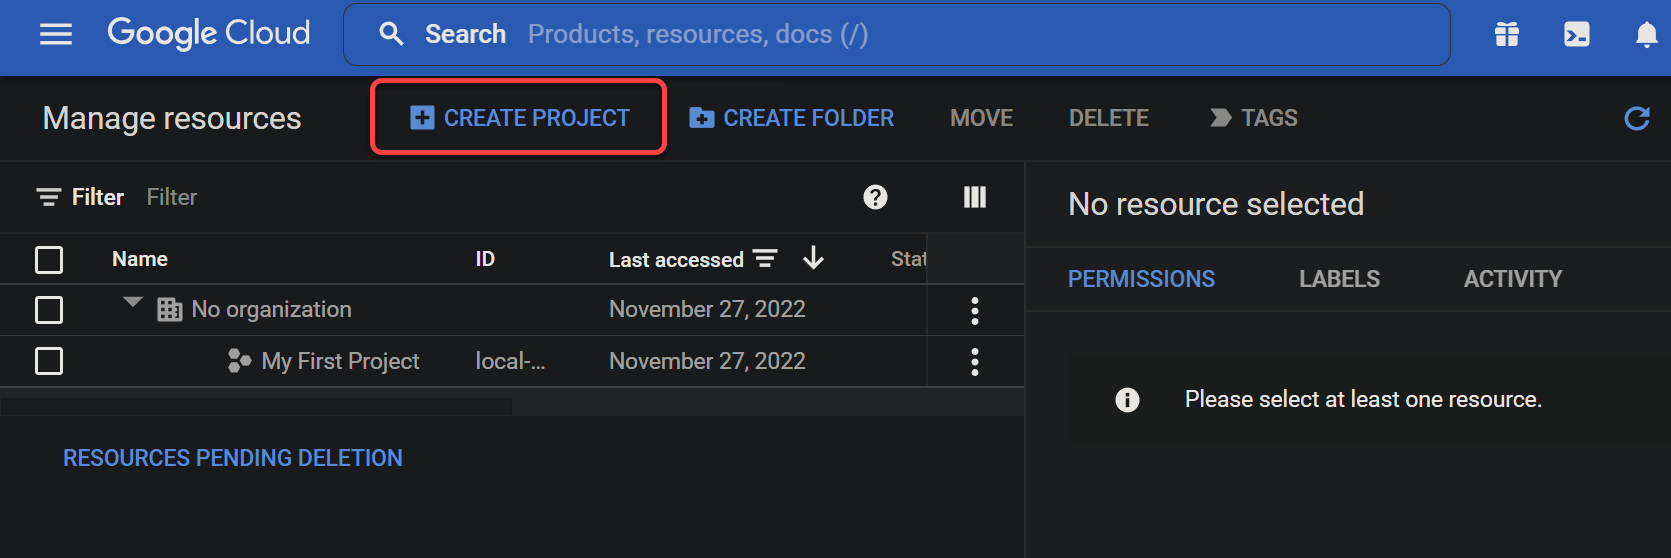 Initiating creating a new Google Cloud project